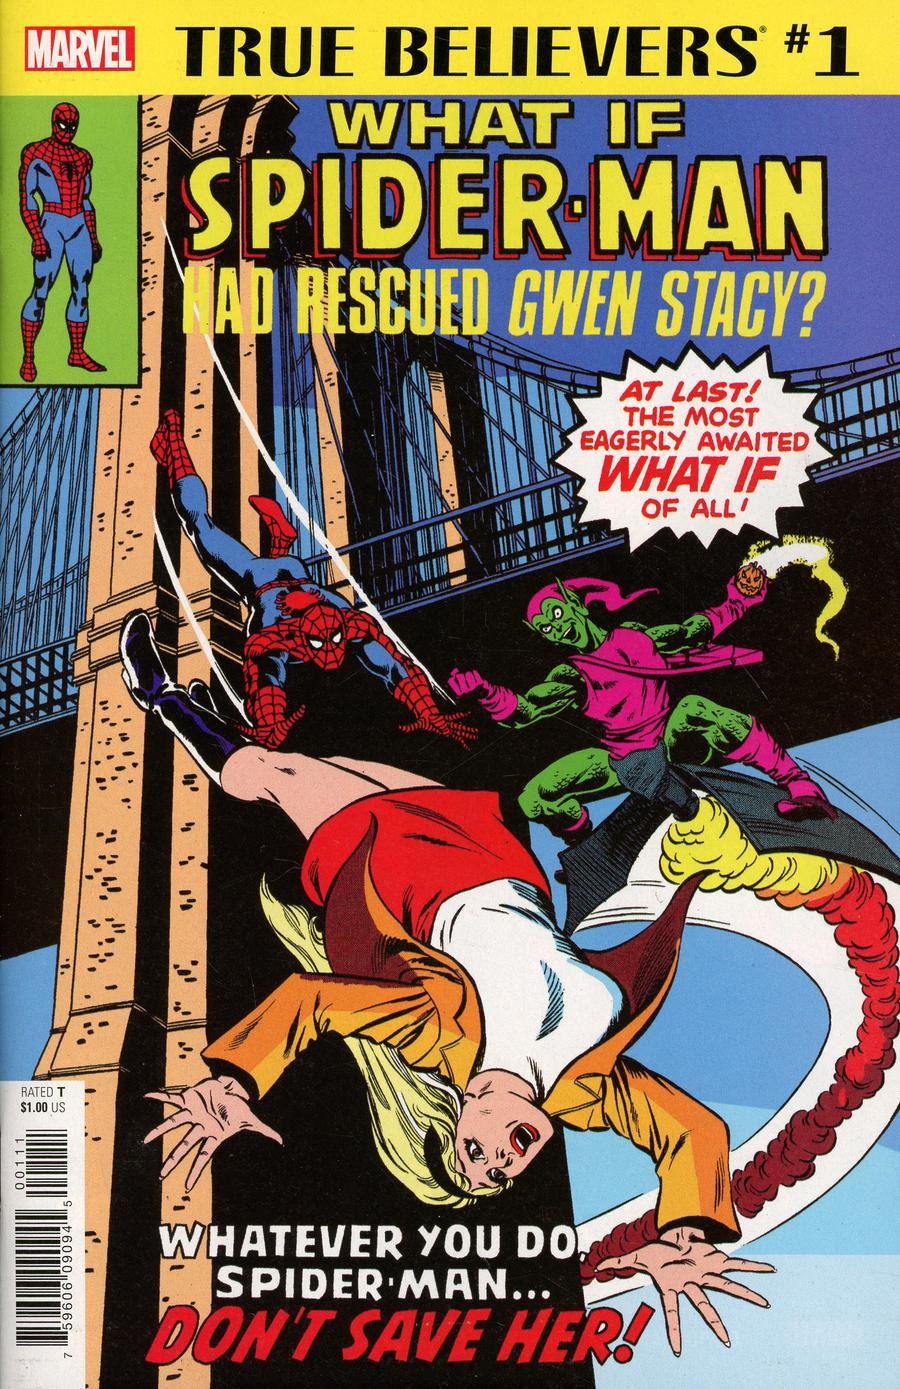 True Believers What If Spider-Man Had Rescued Gwen Stacy Vol. 1 #1